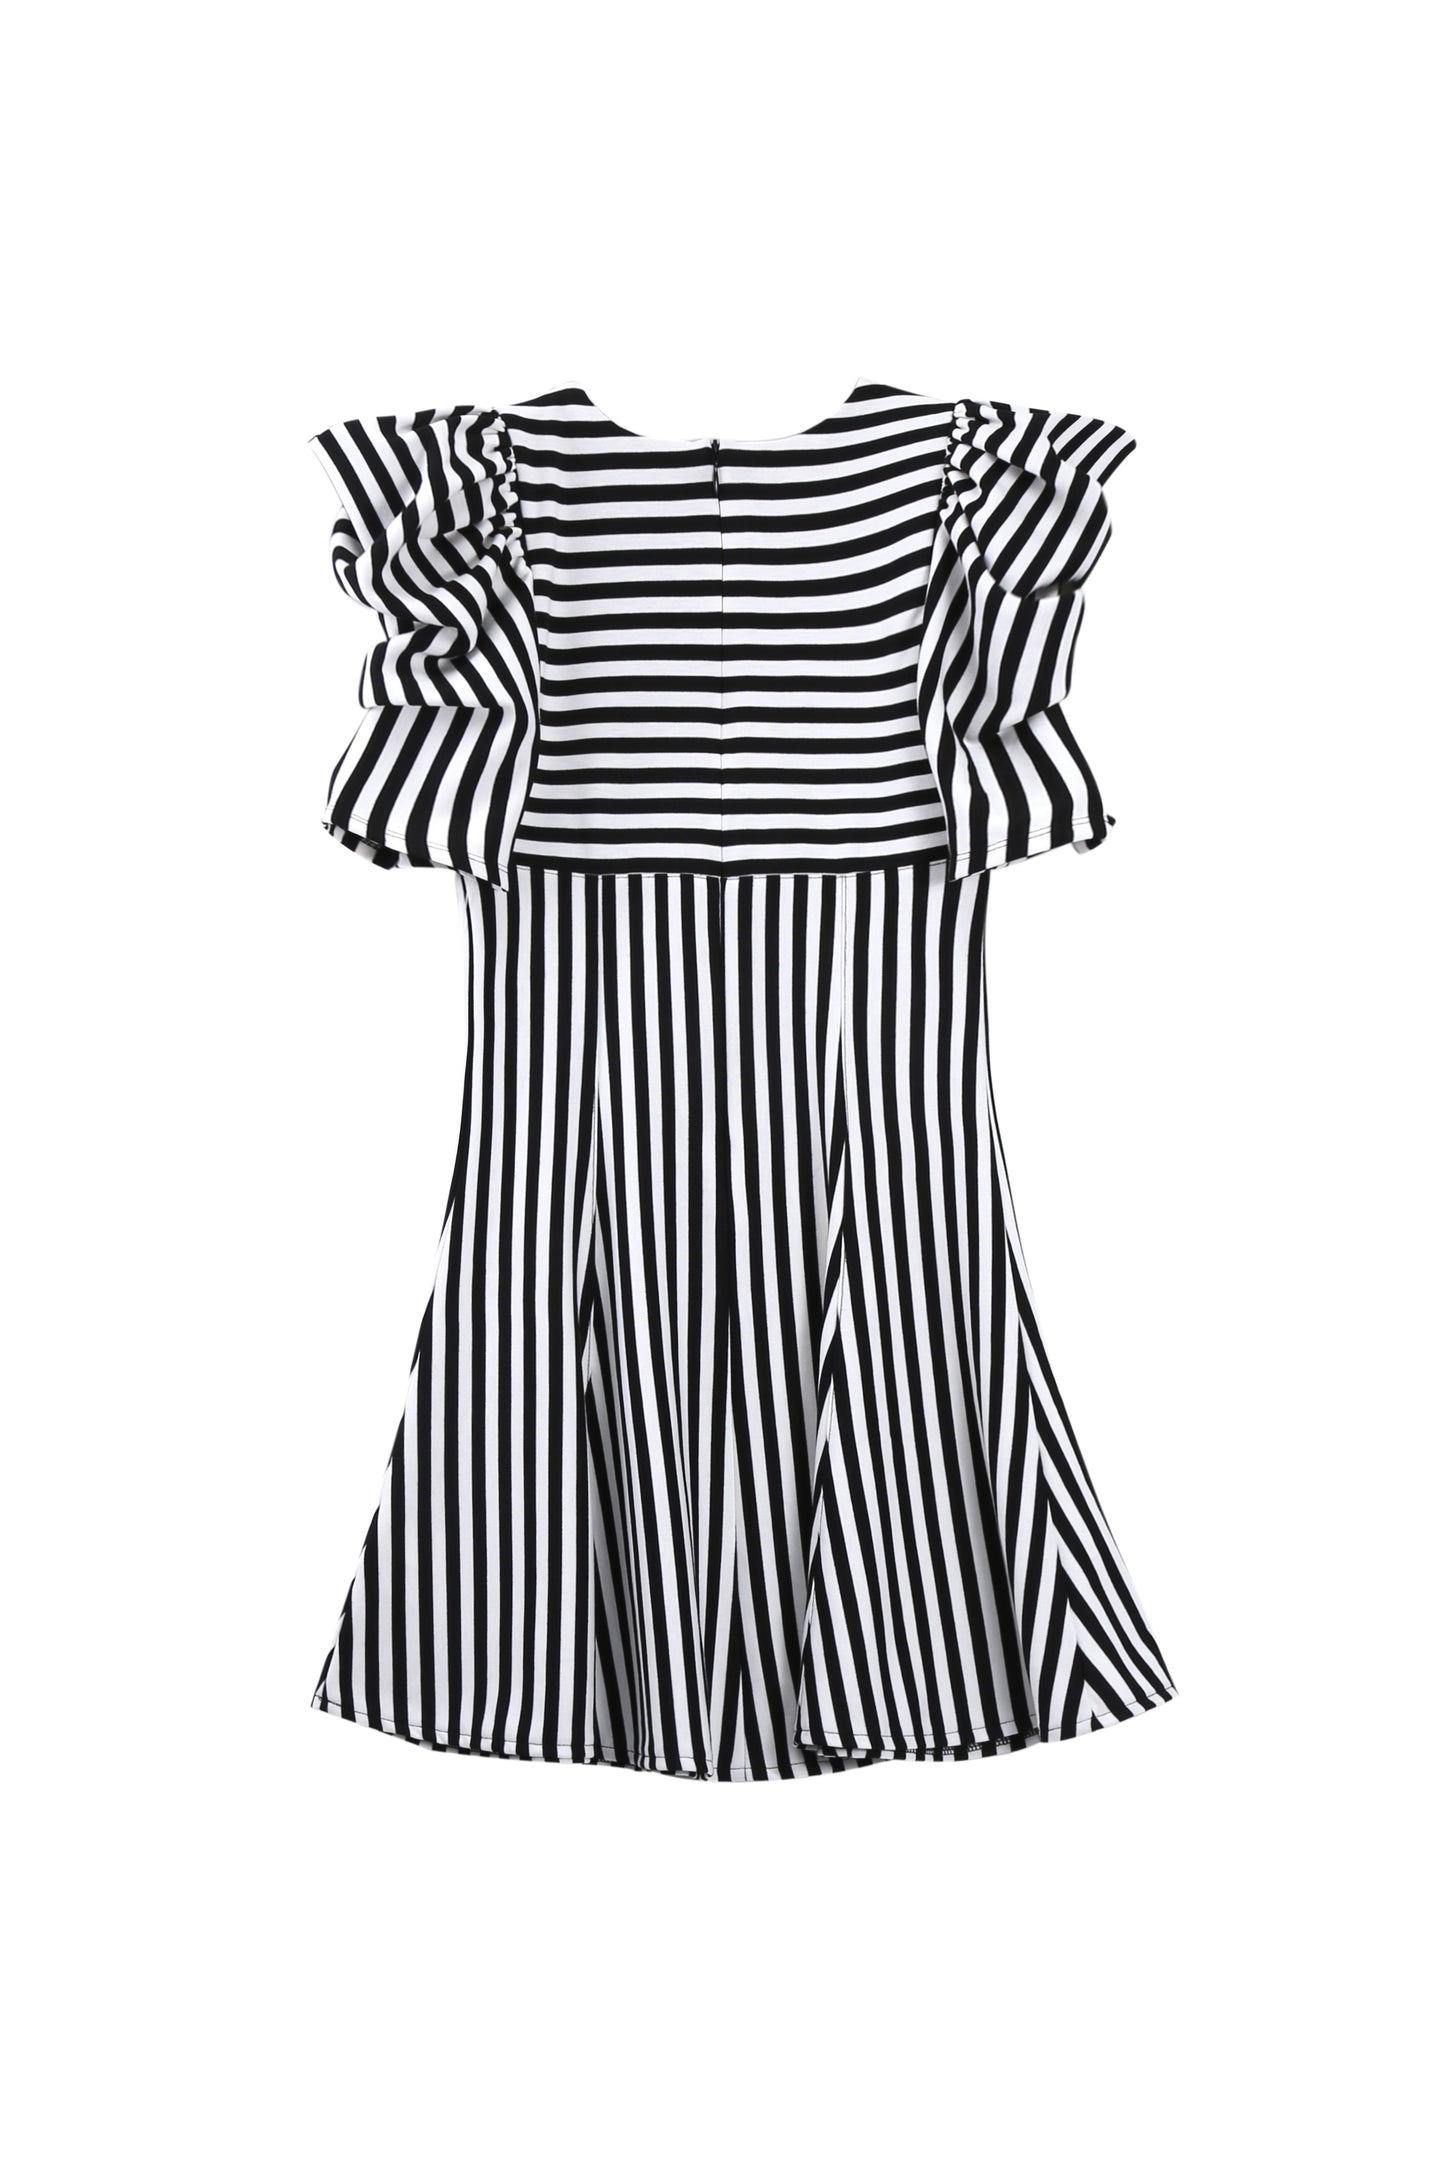 BACK OF BLACK AND WHITE STRIPED SHORT-PUFF-SLEEVE STRIPED DRESS